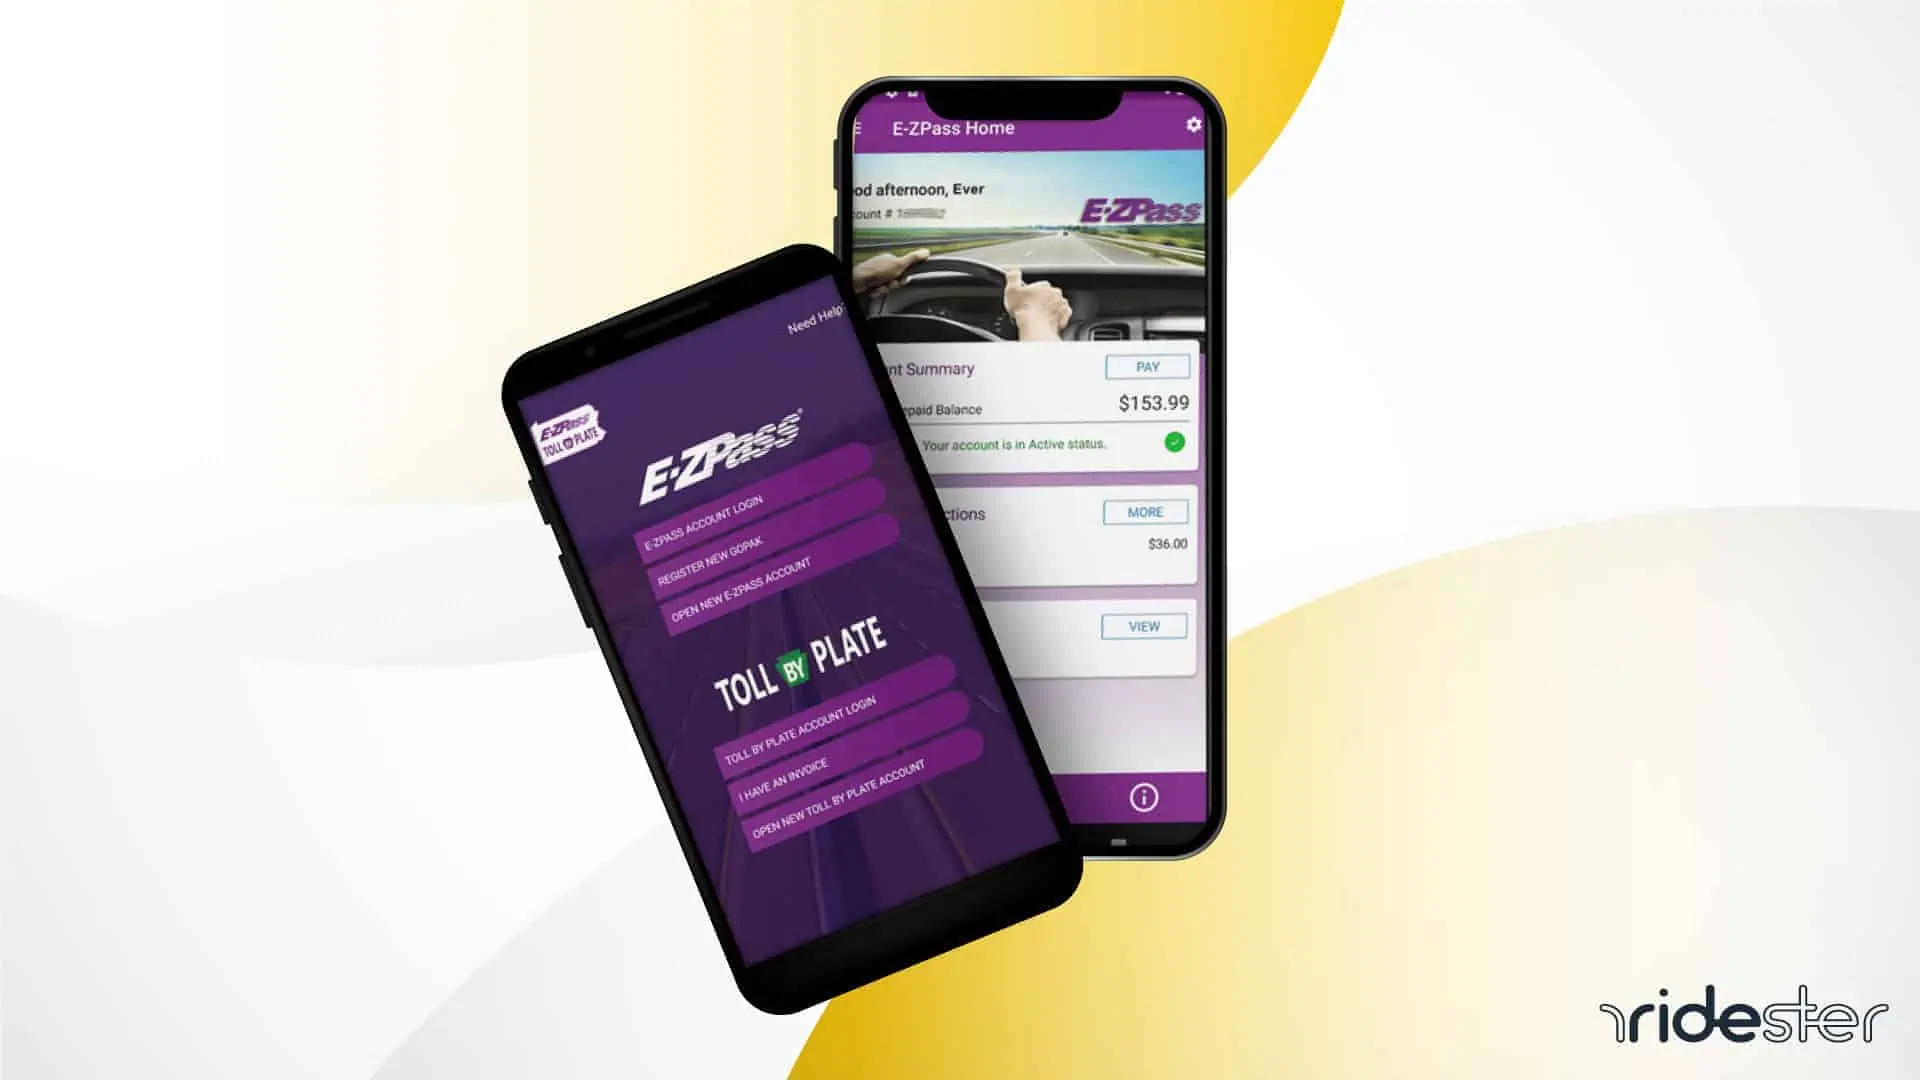 vector graphic showing an e-z pass in one hand and a smartphone in the other that has an e-z pass balance on the screen